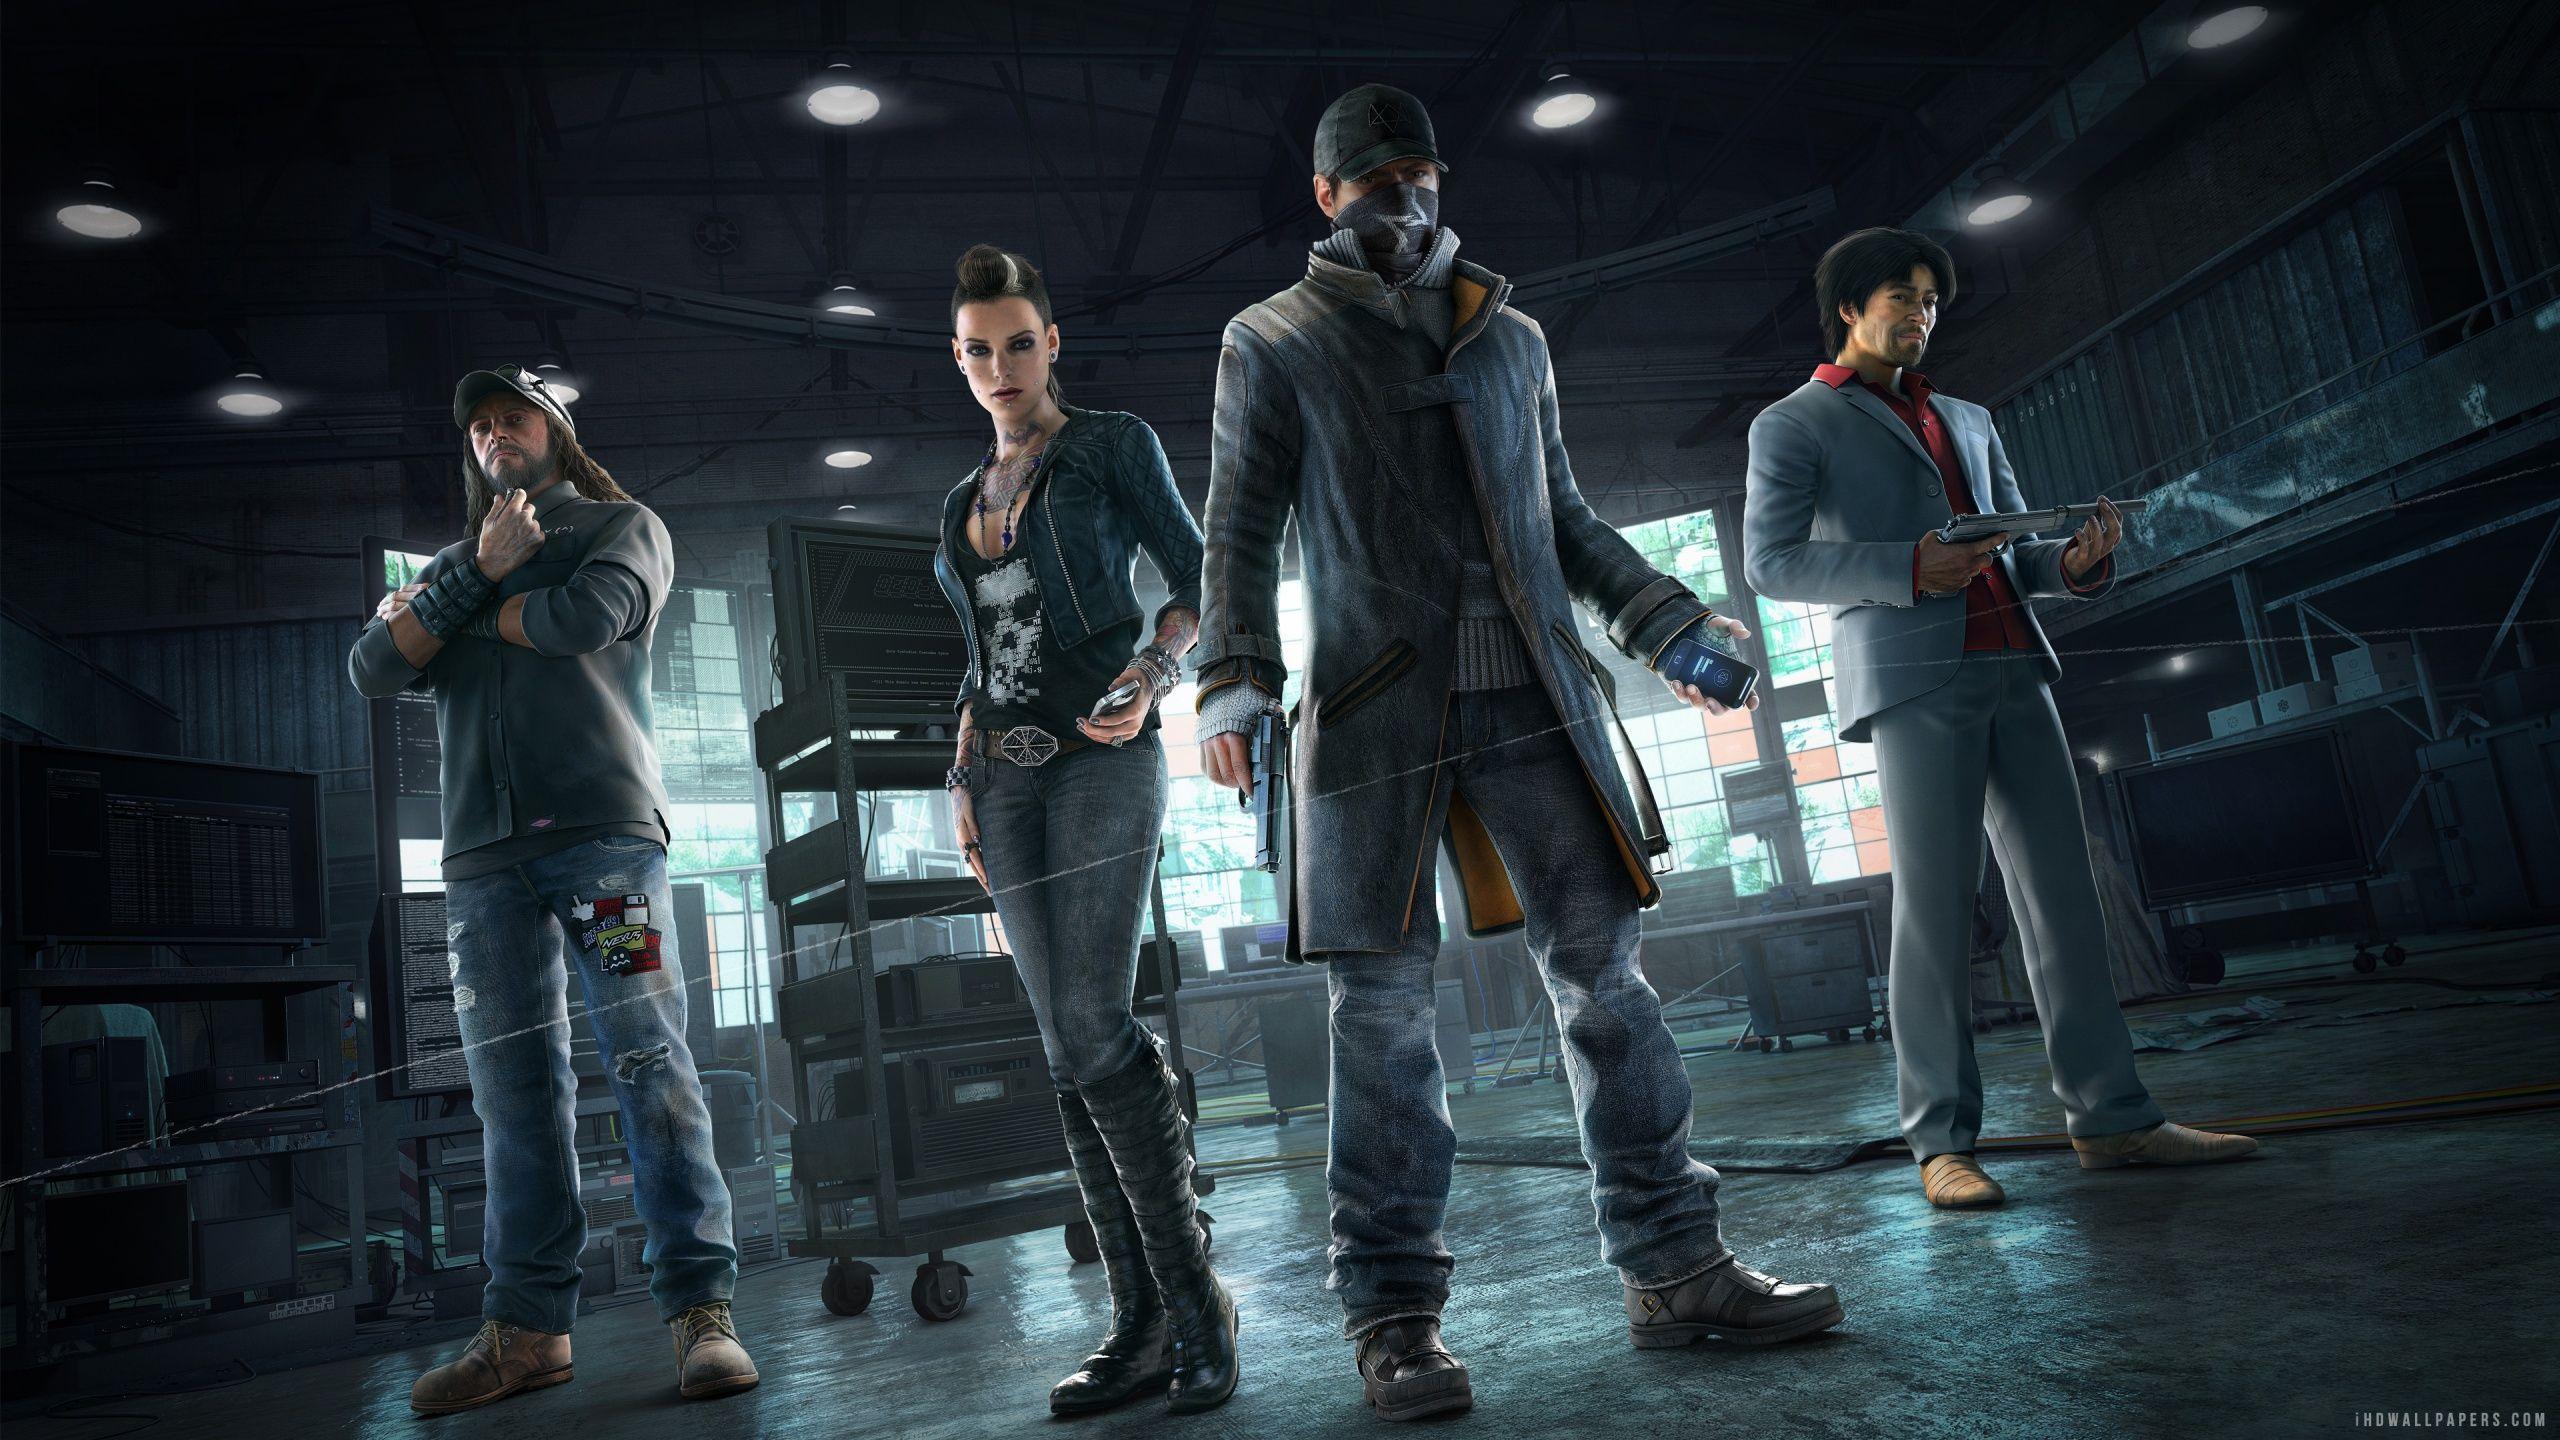 Watch Dogs 2 Video Game HD Wallpaper